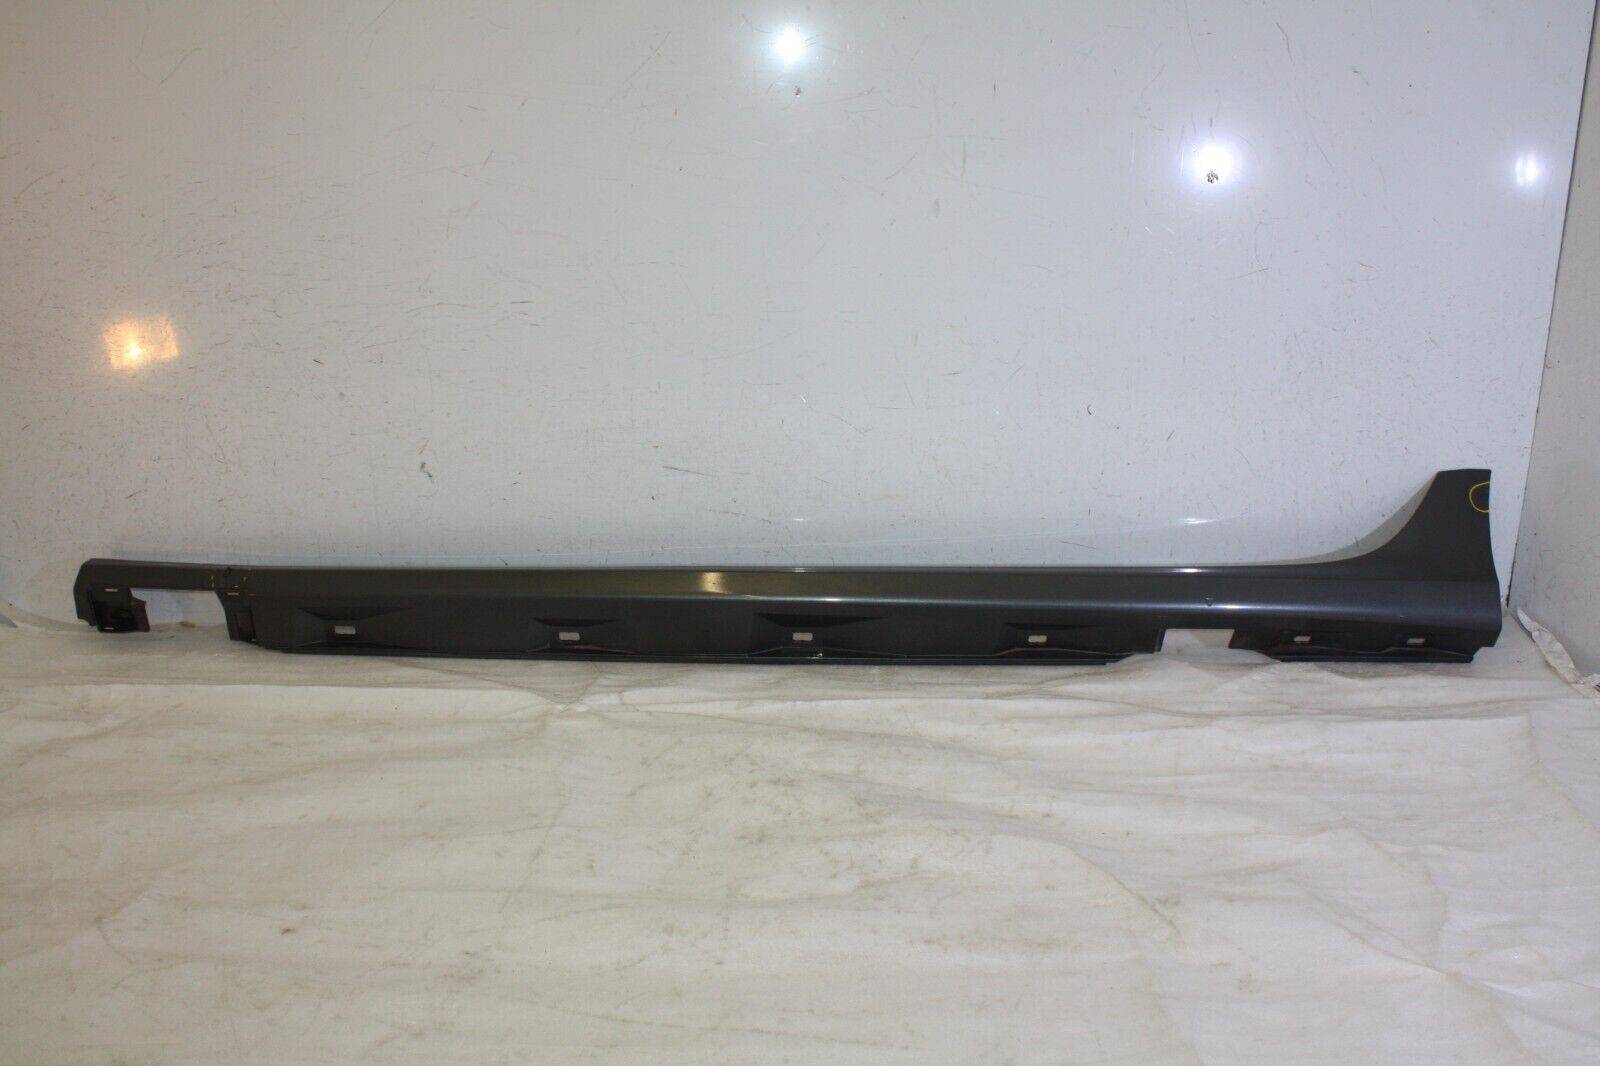 Audi A6 C7 S Line Left Side Skirt 2011 TO 2014 4G0853859F Genuine SEE PICS 176215349130